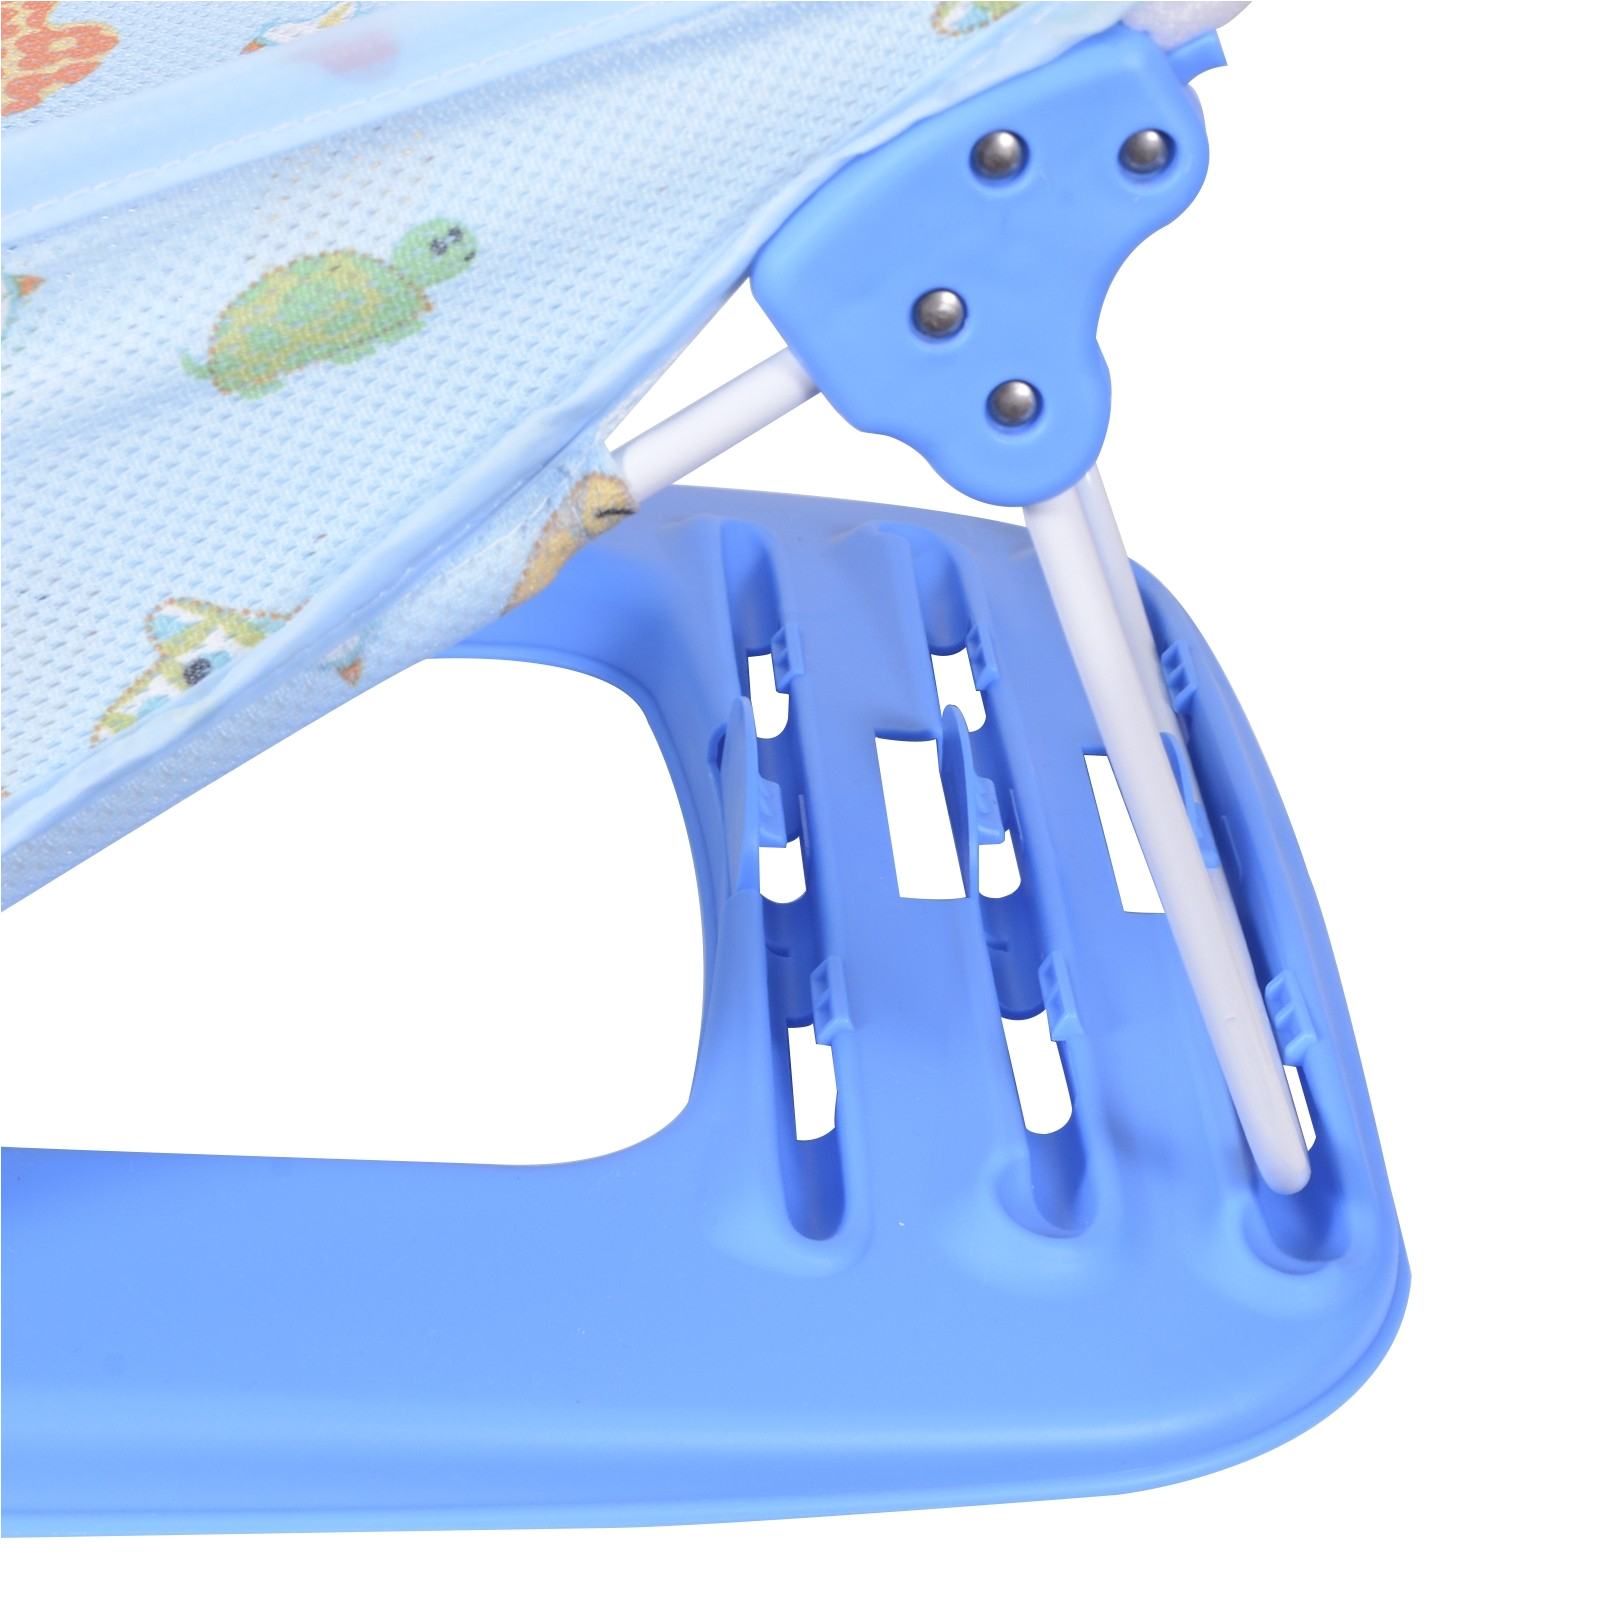 Baby Bath Tub with Stand Target Baby Infant toddlers Bath Tub Seat Child Shower Stand